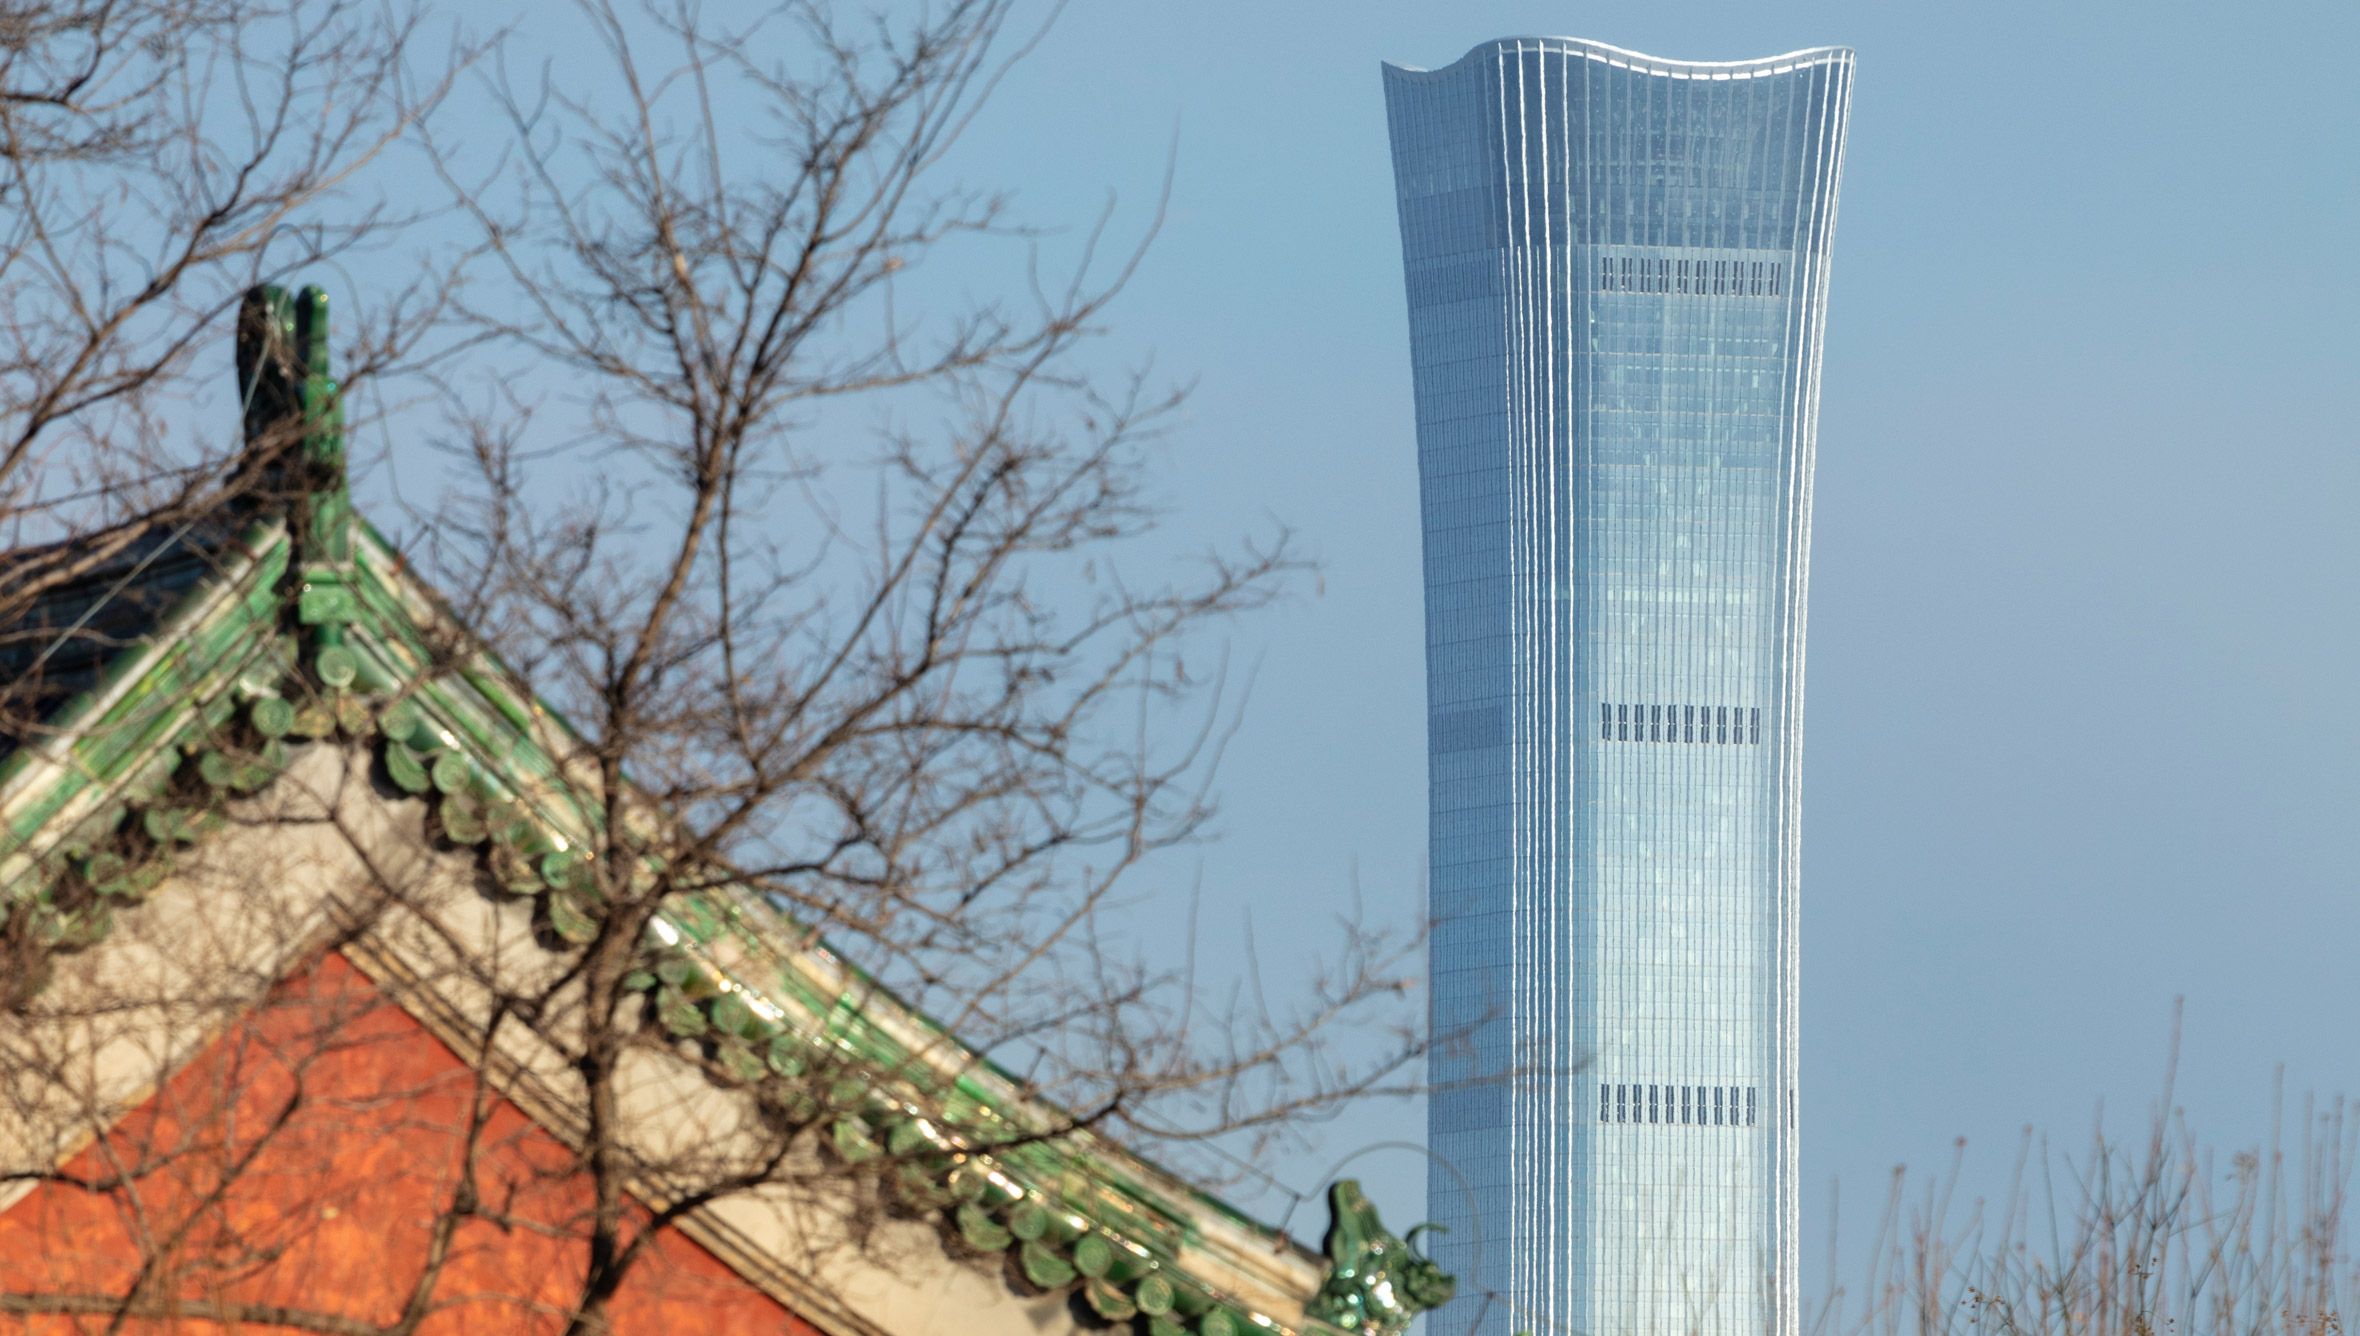 Beijing's Tallest Tower Opens its Doors, But There's a Lot More to Come